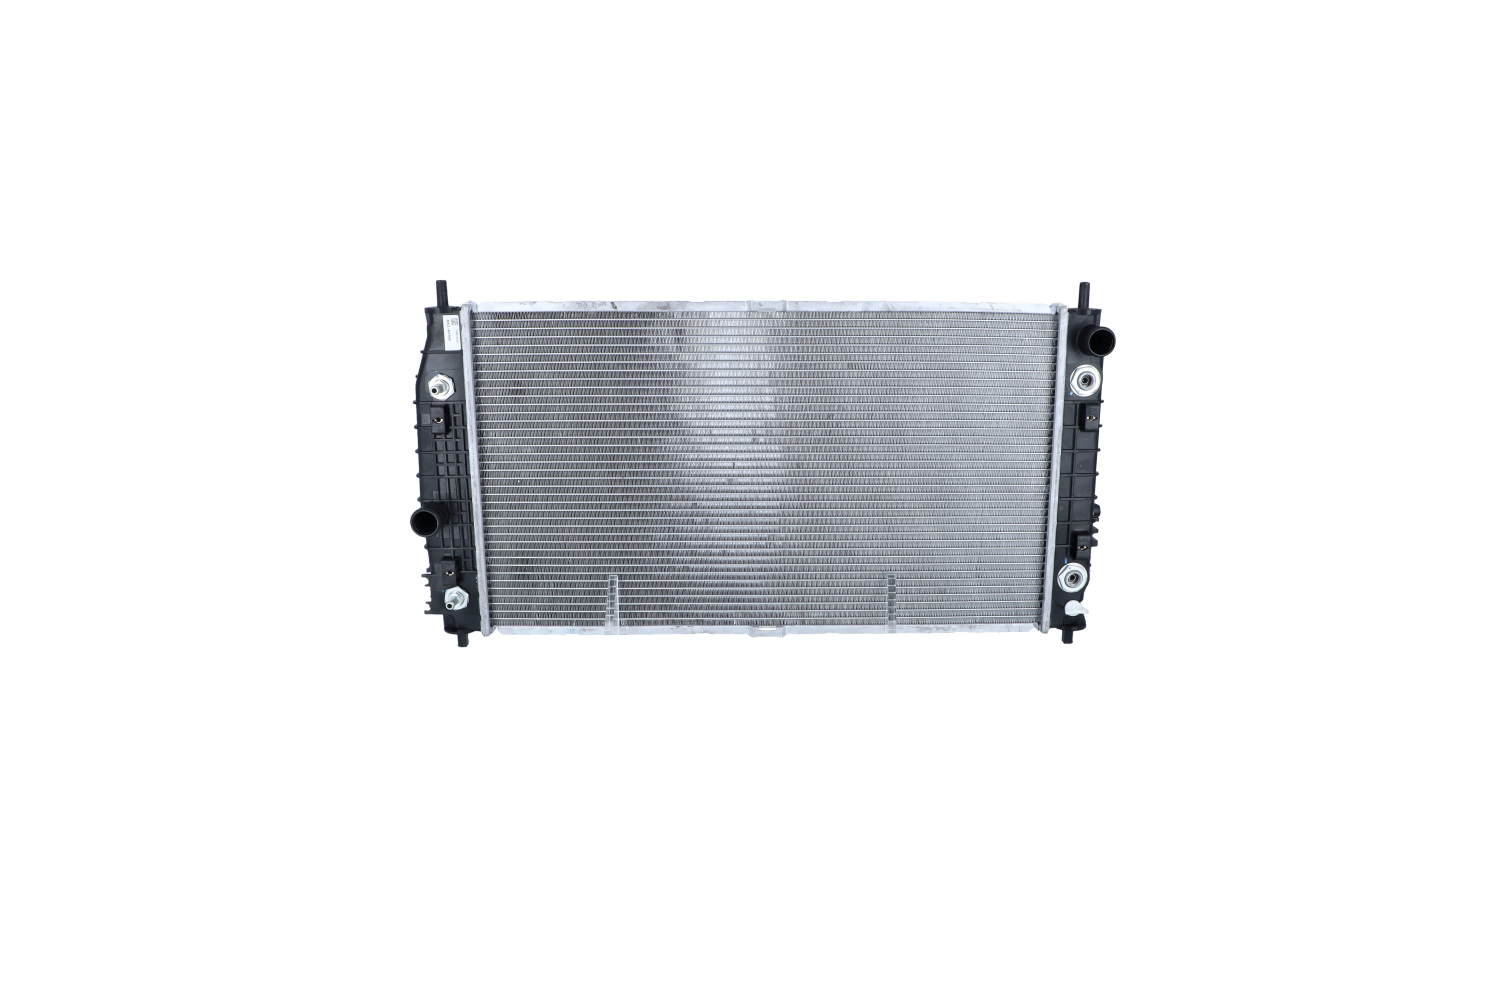 NRF 53954 Engine radiator Aluminium, 673 x 372 x 26 mm, with mounting parts, Brazed cooling fins